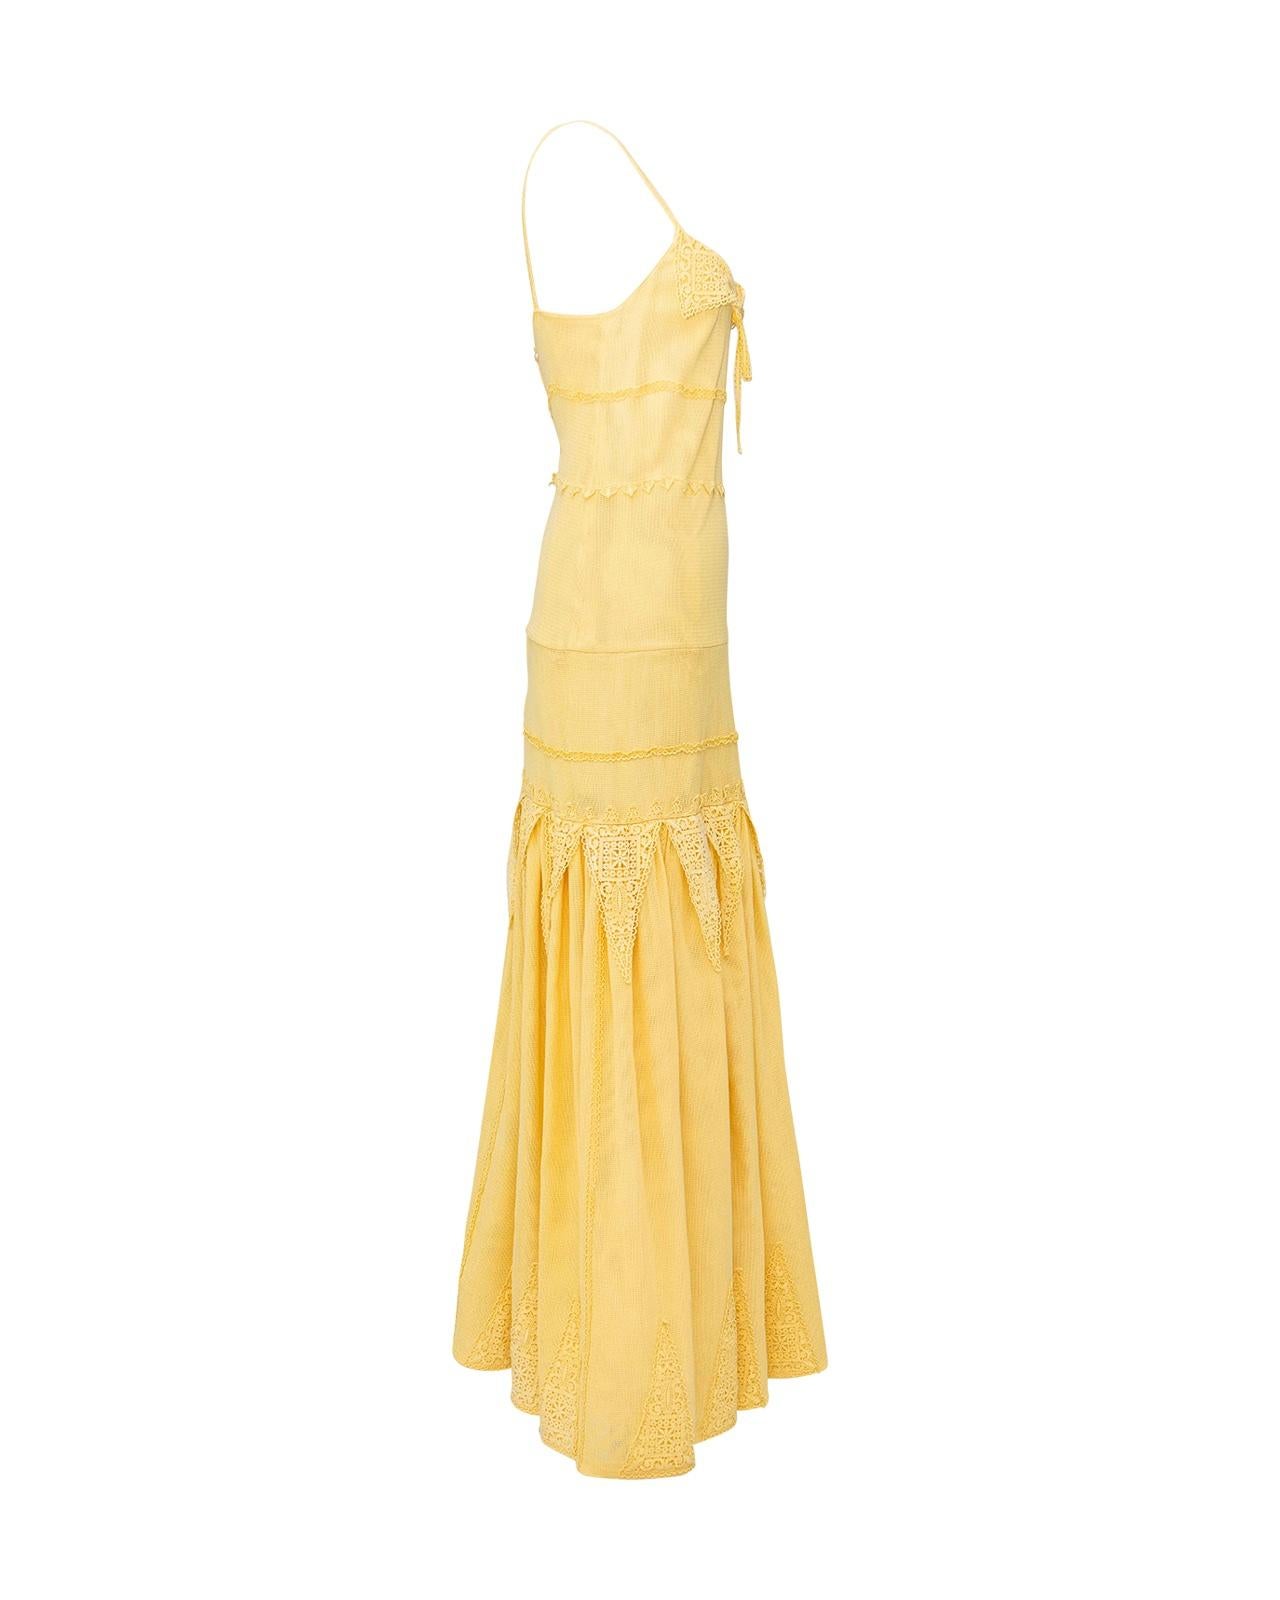 Women's 1980s Chloé by Karl Lagerfeld Yellow Dress with Lace Details